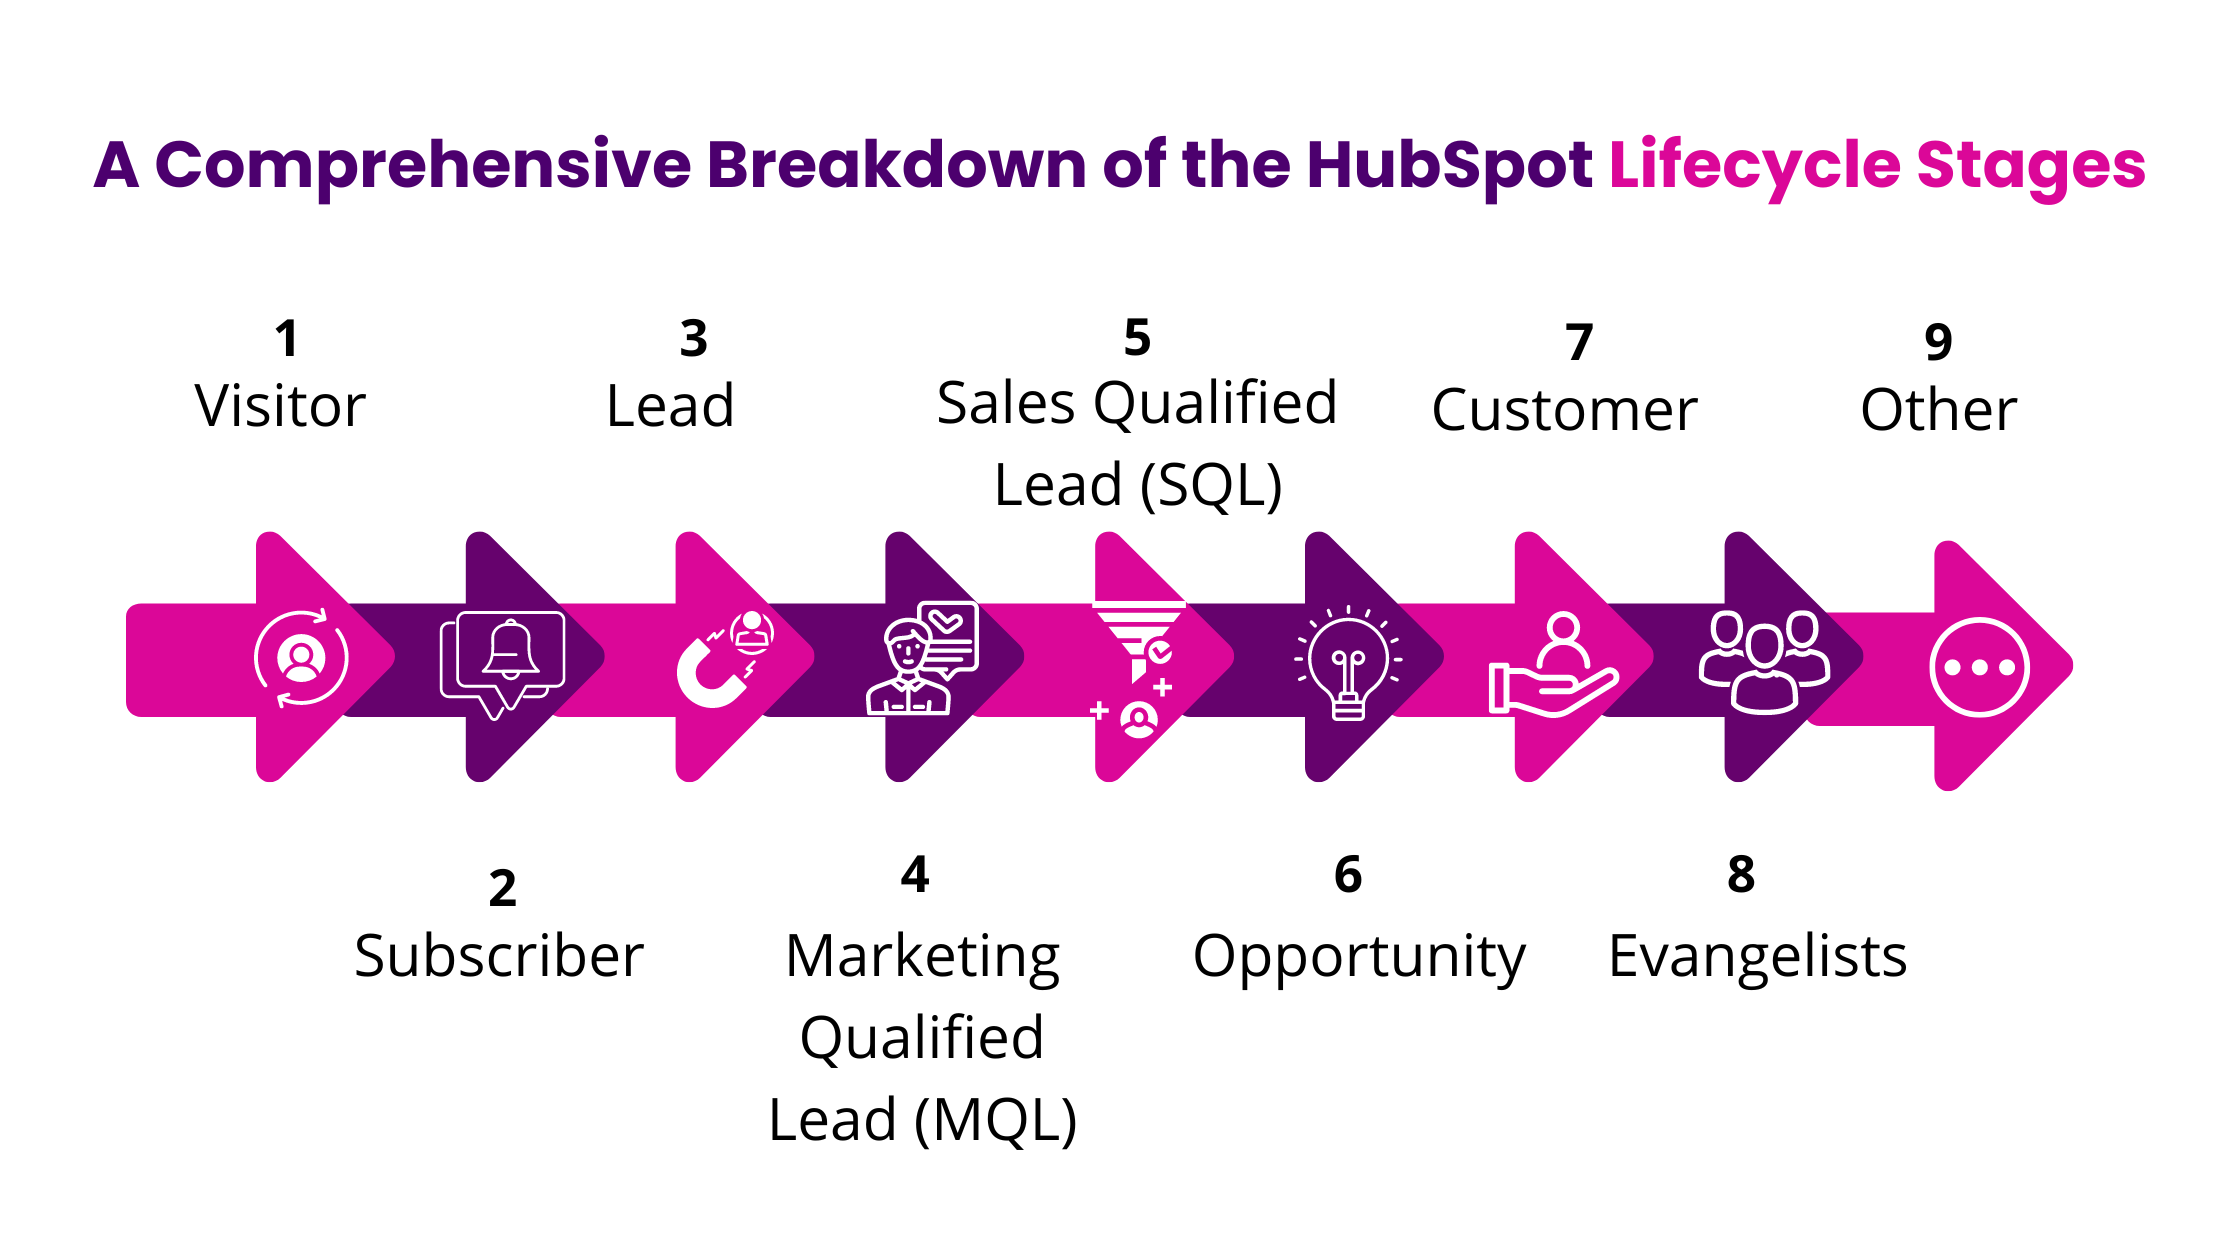 A Comprehensive Breakdown of the HubSpot Lifecycle Stages